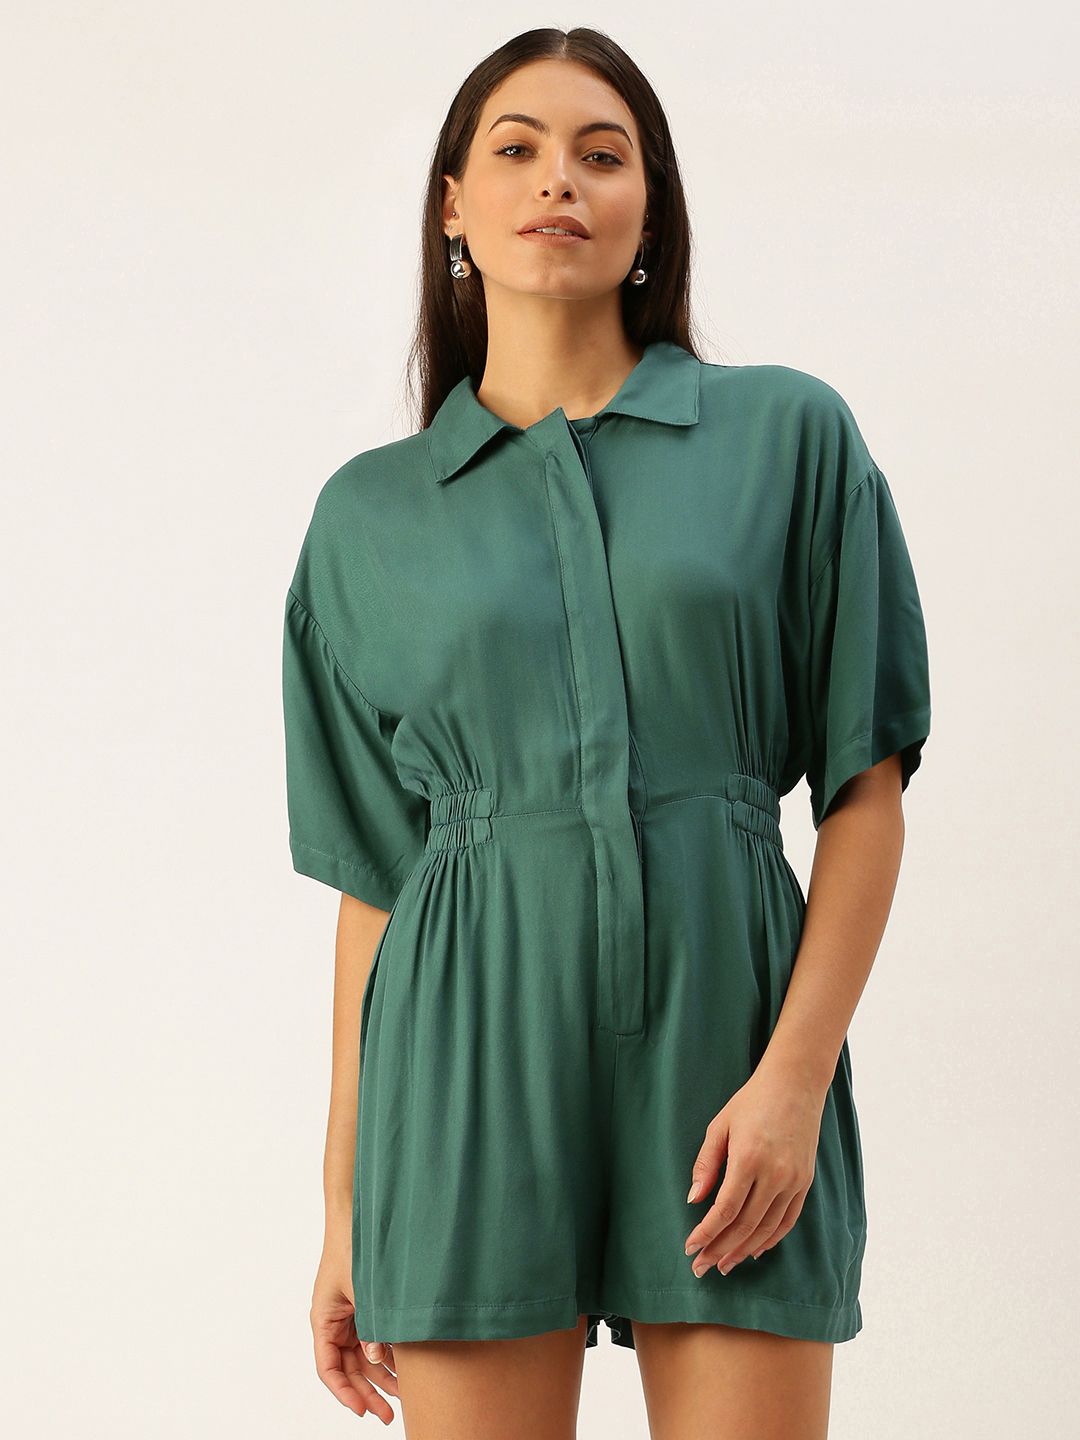 FOREVER 21 Women Teal Green Solid Shirt-Collar Playsuit Price in India